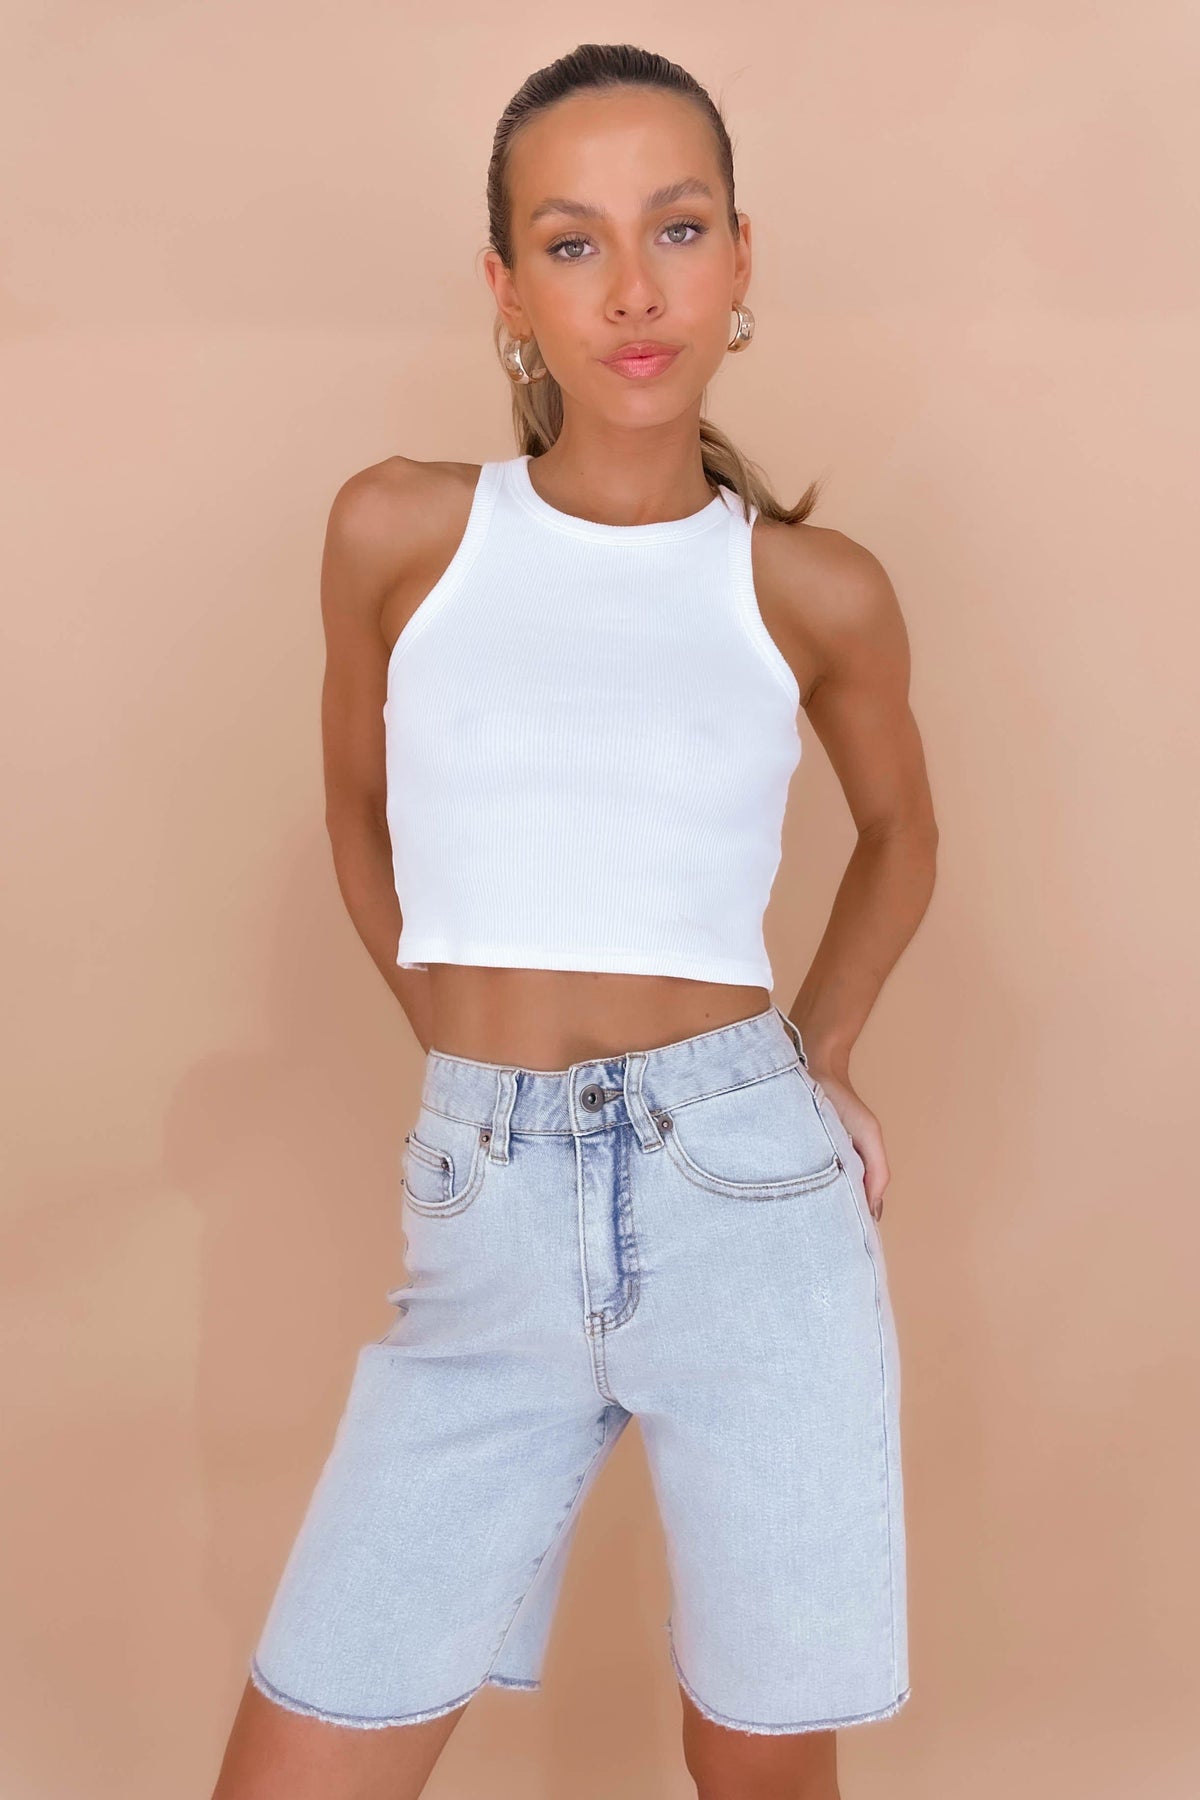 Charlisse Shorts, BLUE, BOTTOMS, COTTON &amp; POLYESTER, COTTON AND POLYESTER, DENIM, HIGH WAISTED, HIGH WAISTED SHORTS, new arrivals, POLYESTER AND COTTON, SHORTS, , -MISHKAH